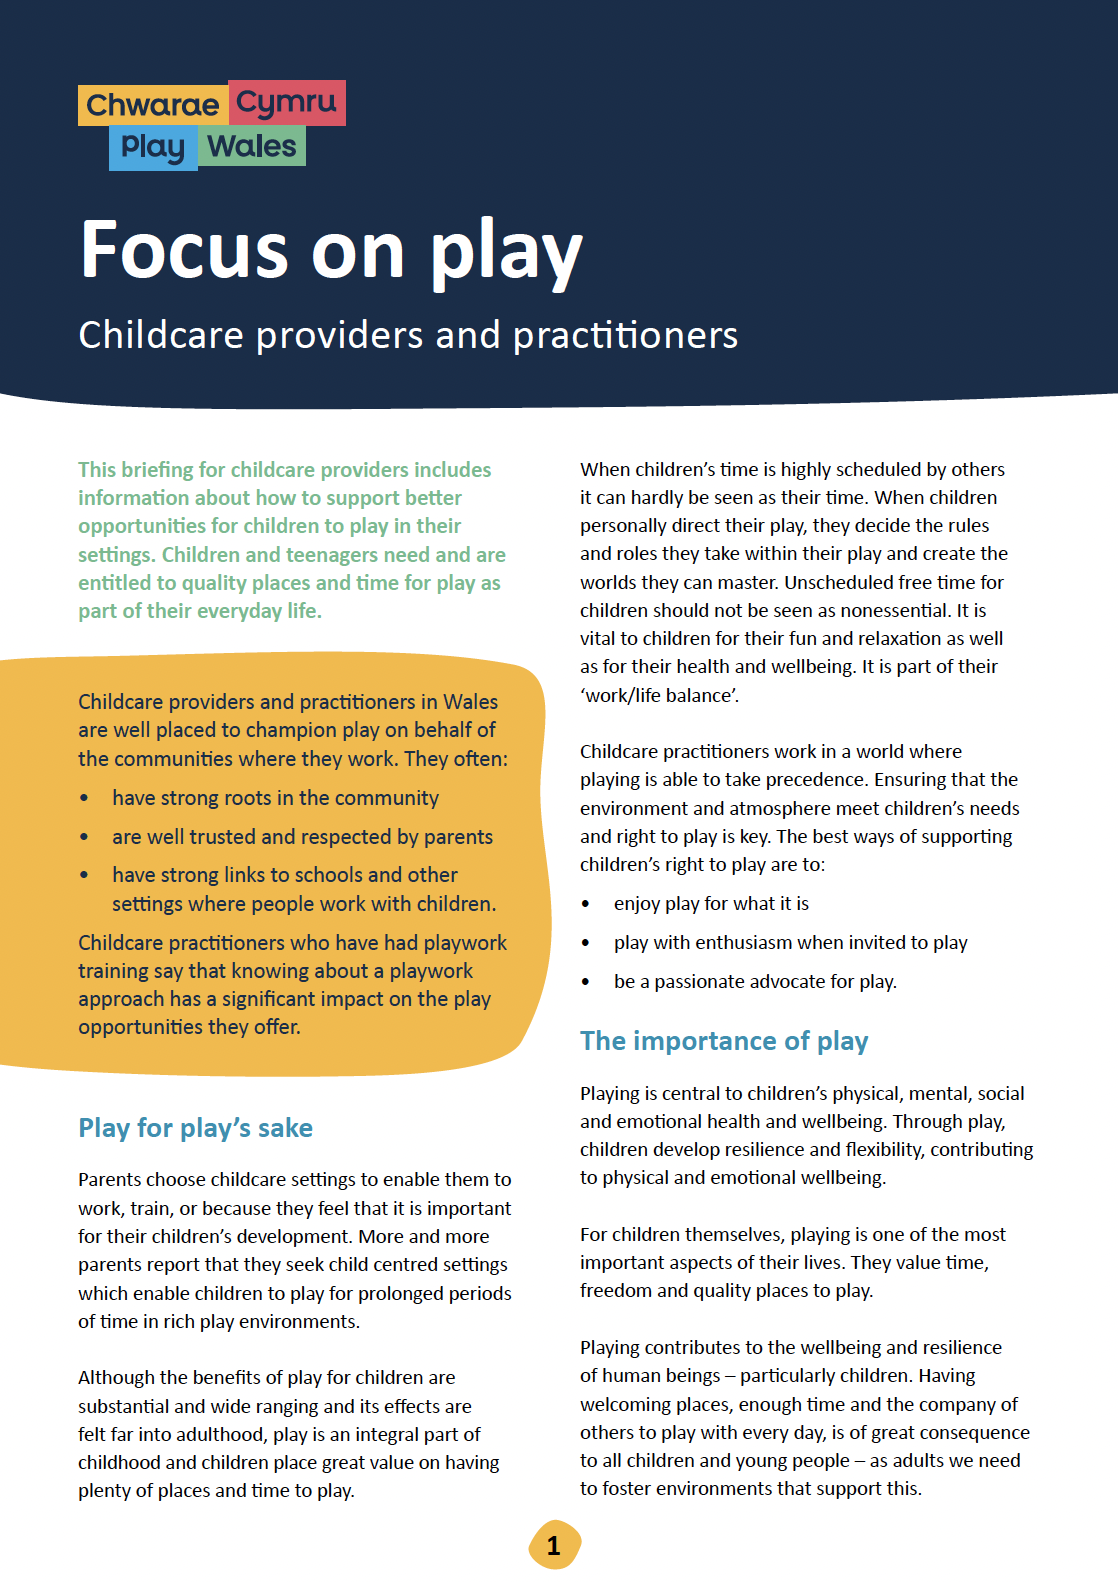 Focus on play – Childcare providers and practitioners